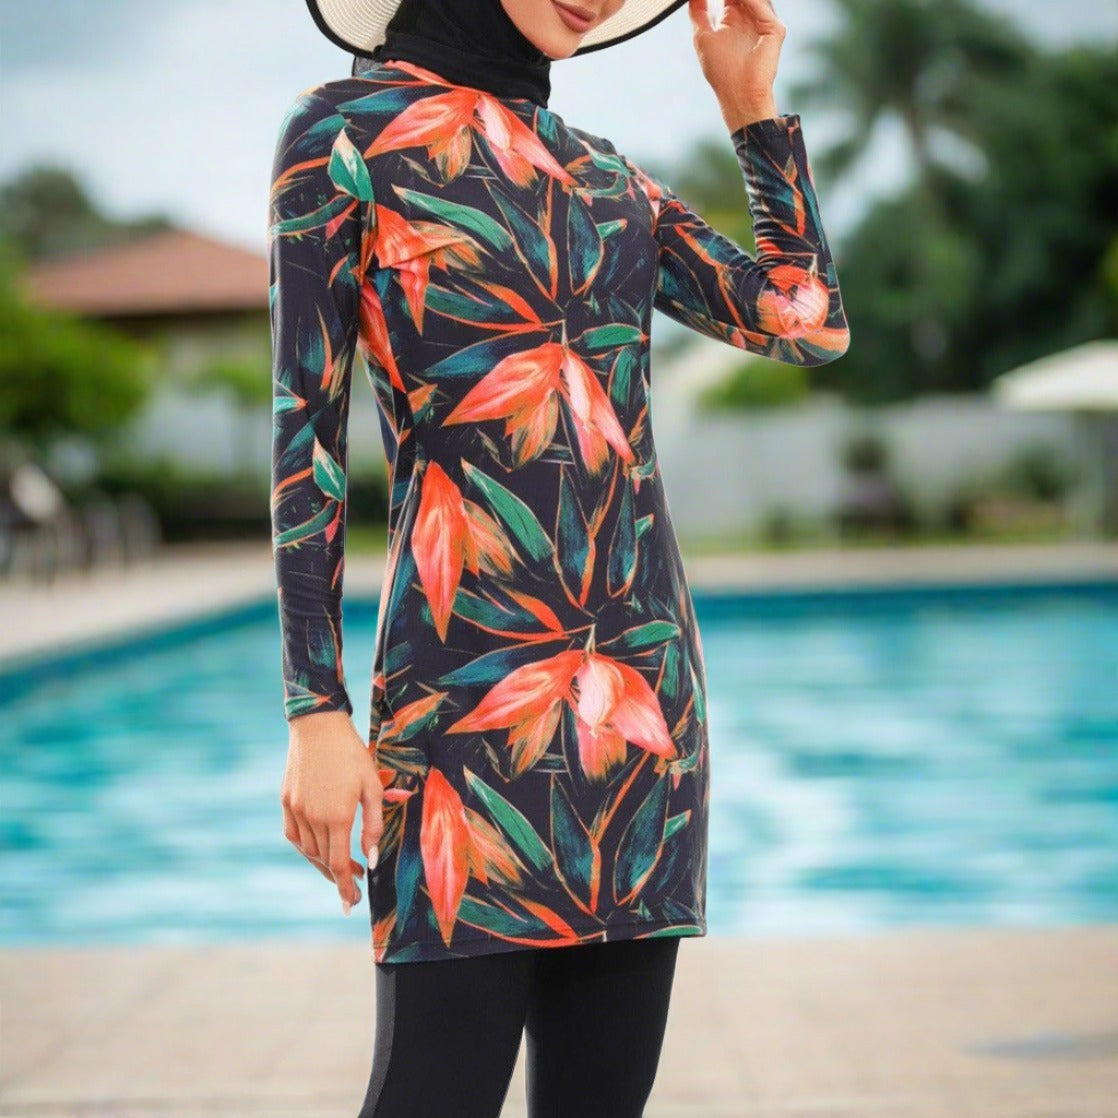 Women's Printed Swimsuit - Try Modest Limited 